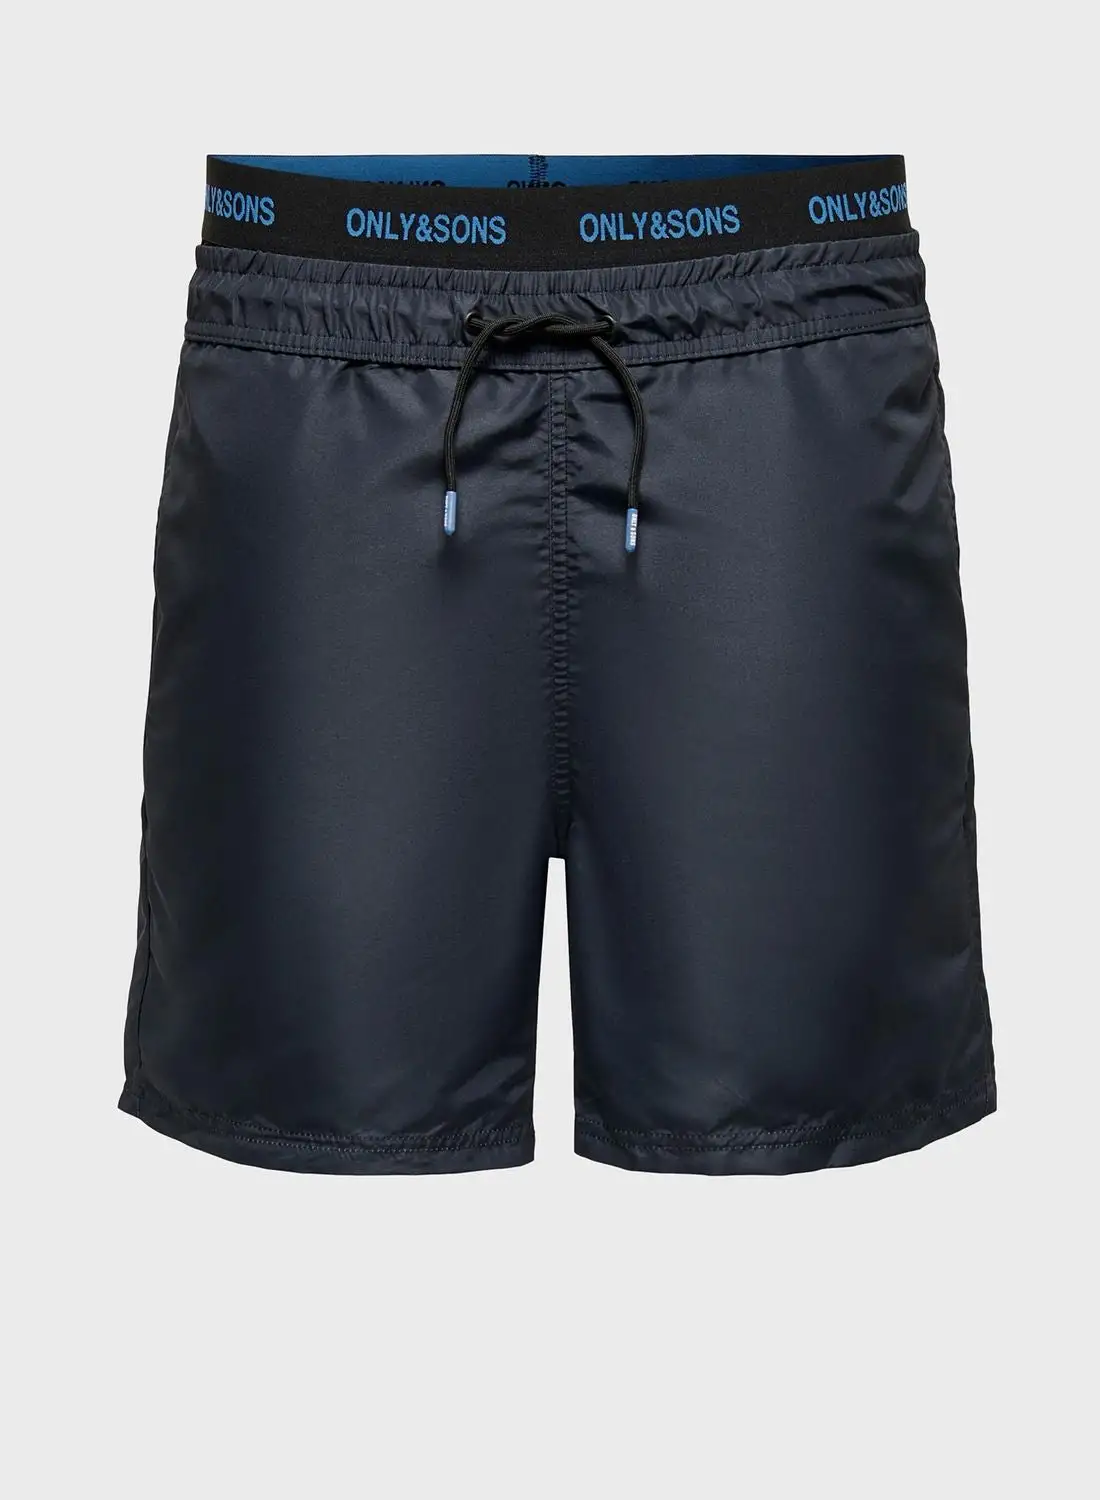 only sons Logo Band Shorts